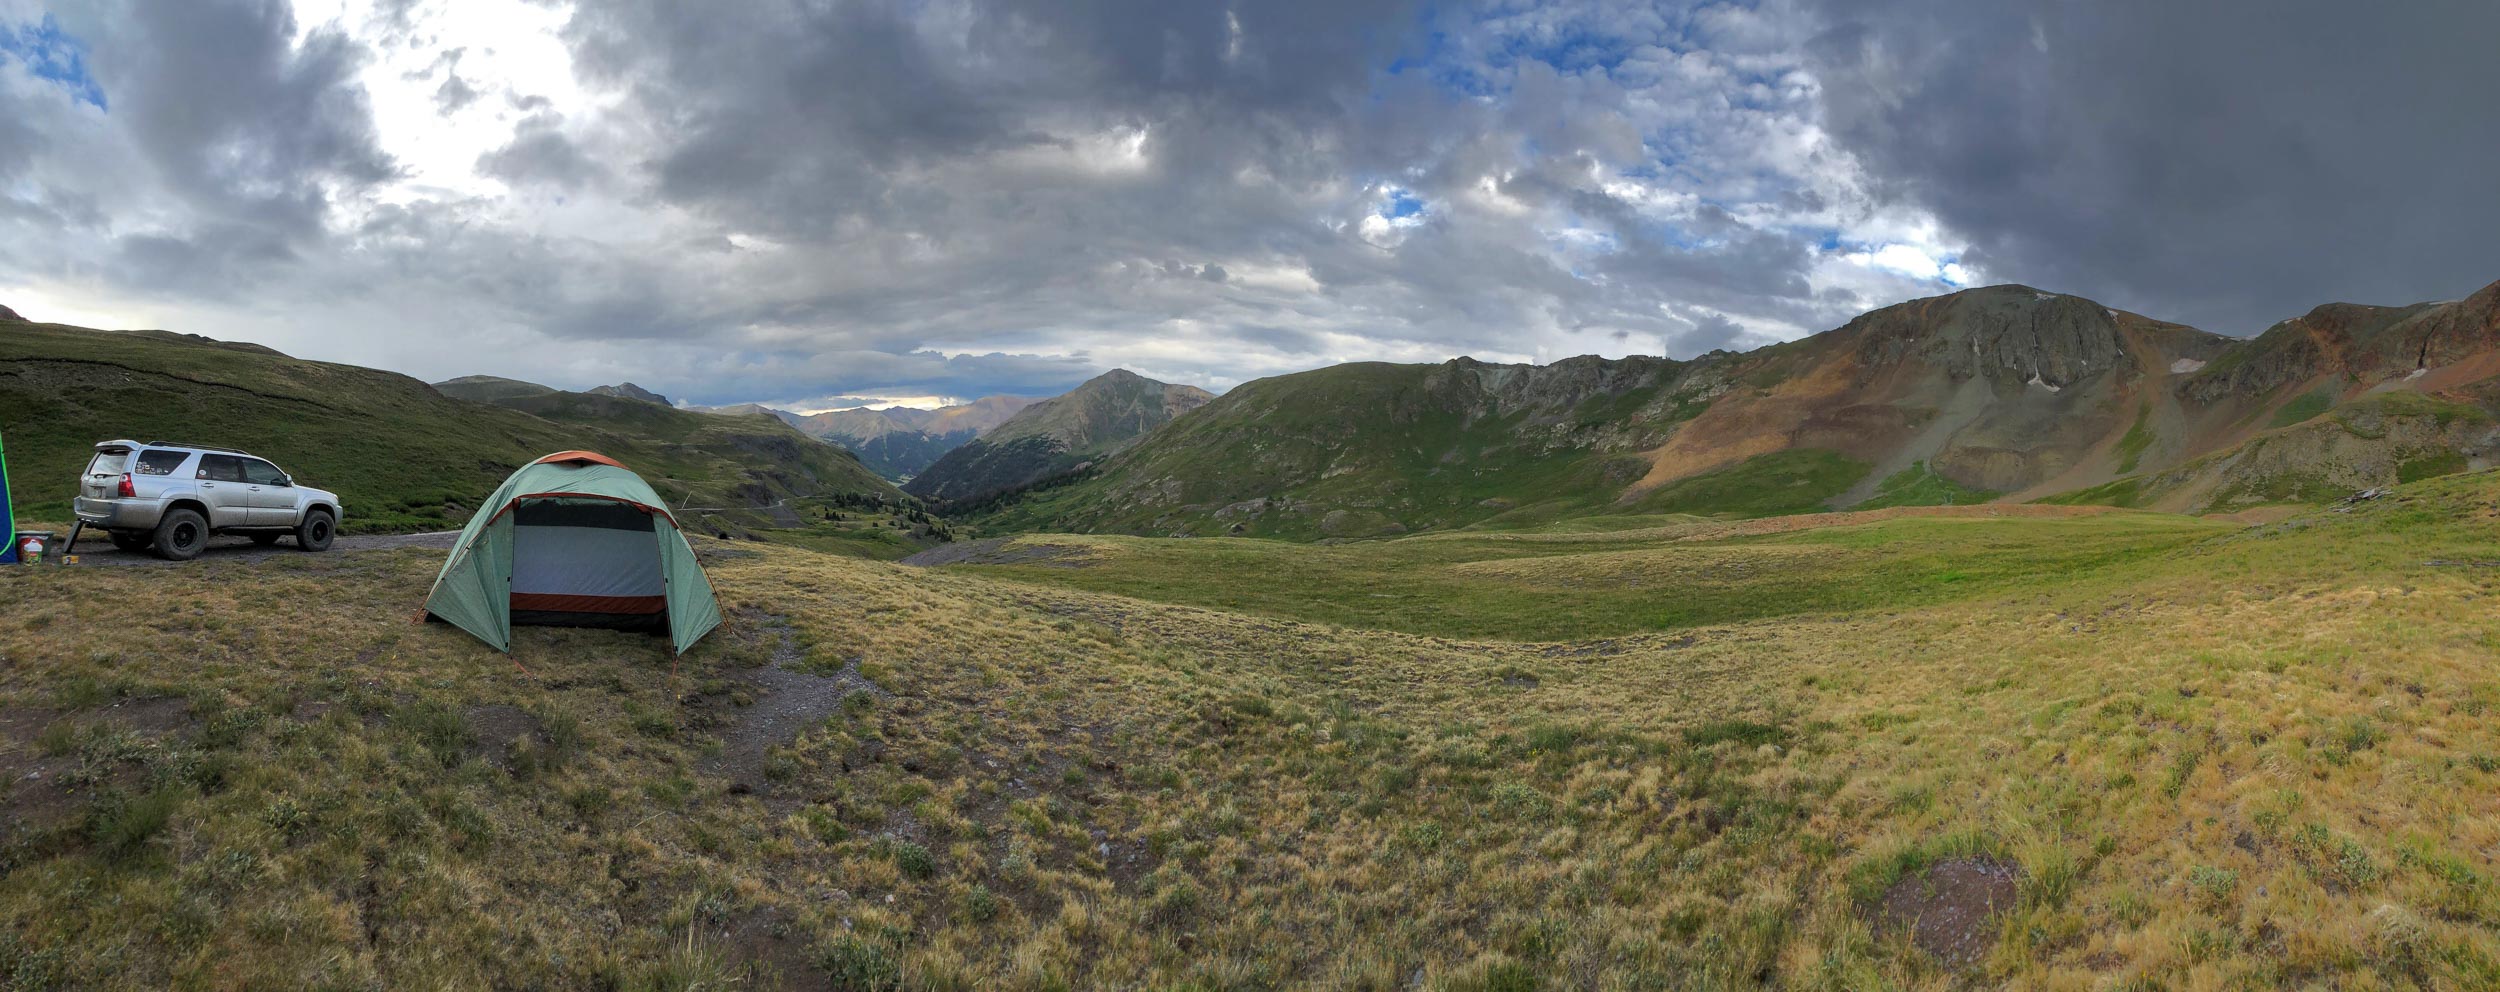  Camping along Cinnamon Pass in the San Juan Mountains - Iphone 8 Plus, Moment Wide Lens Panorama 